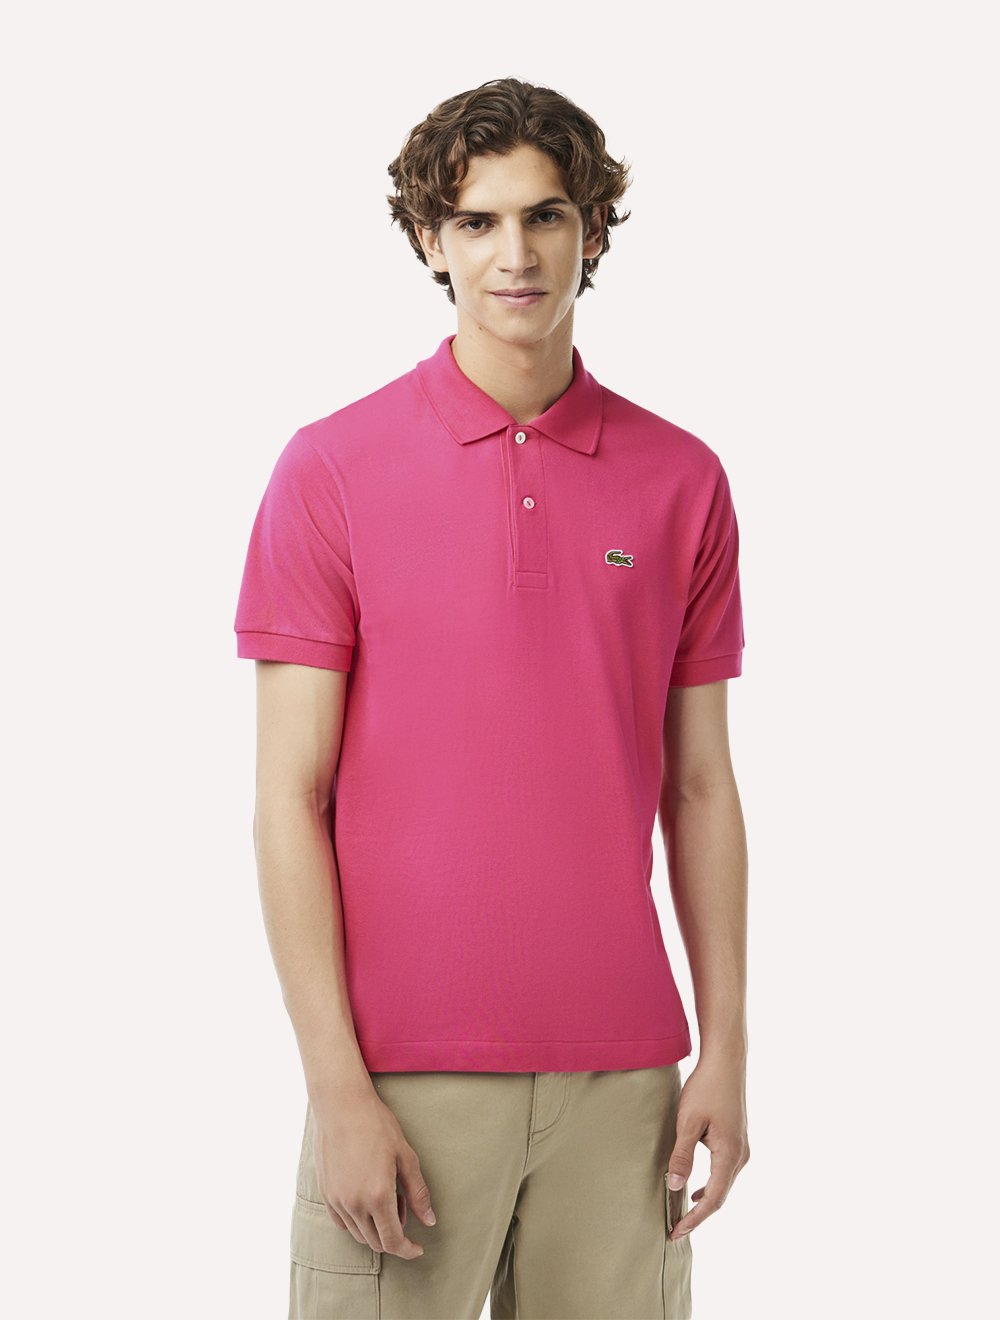 Polo Lacoste Masculina L.12.12 Rosa Pink